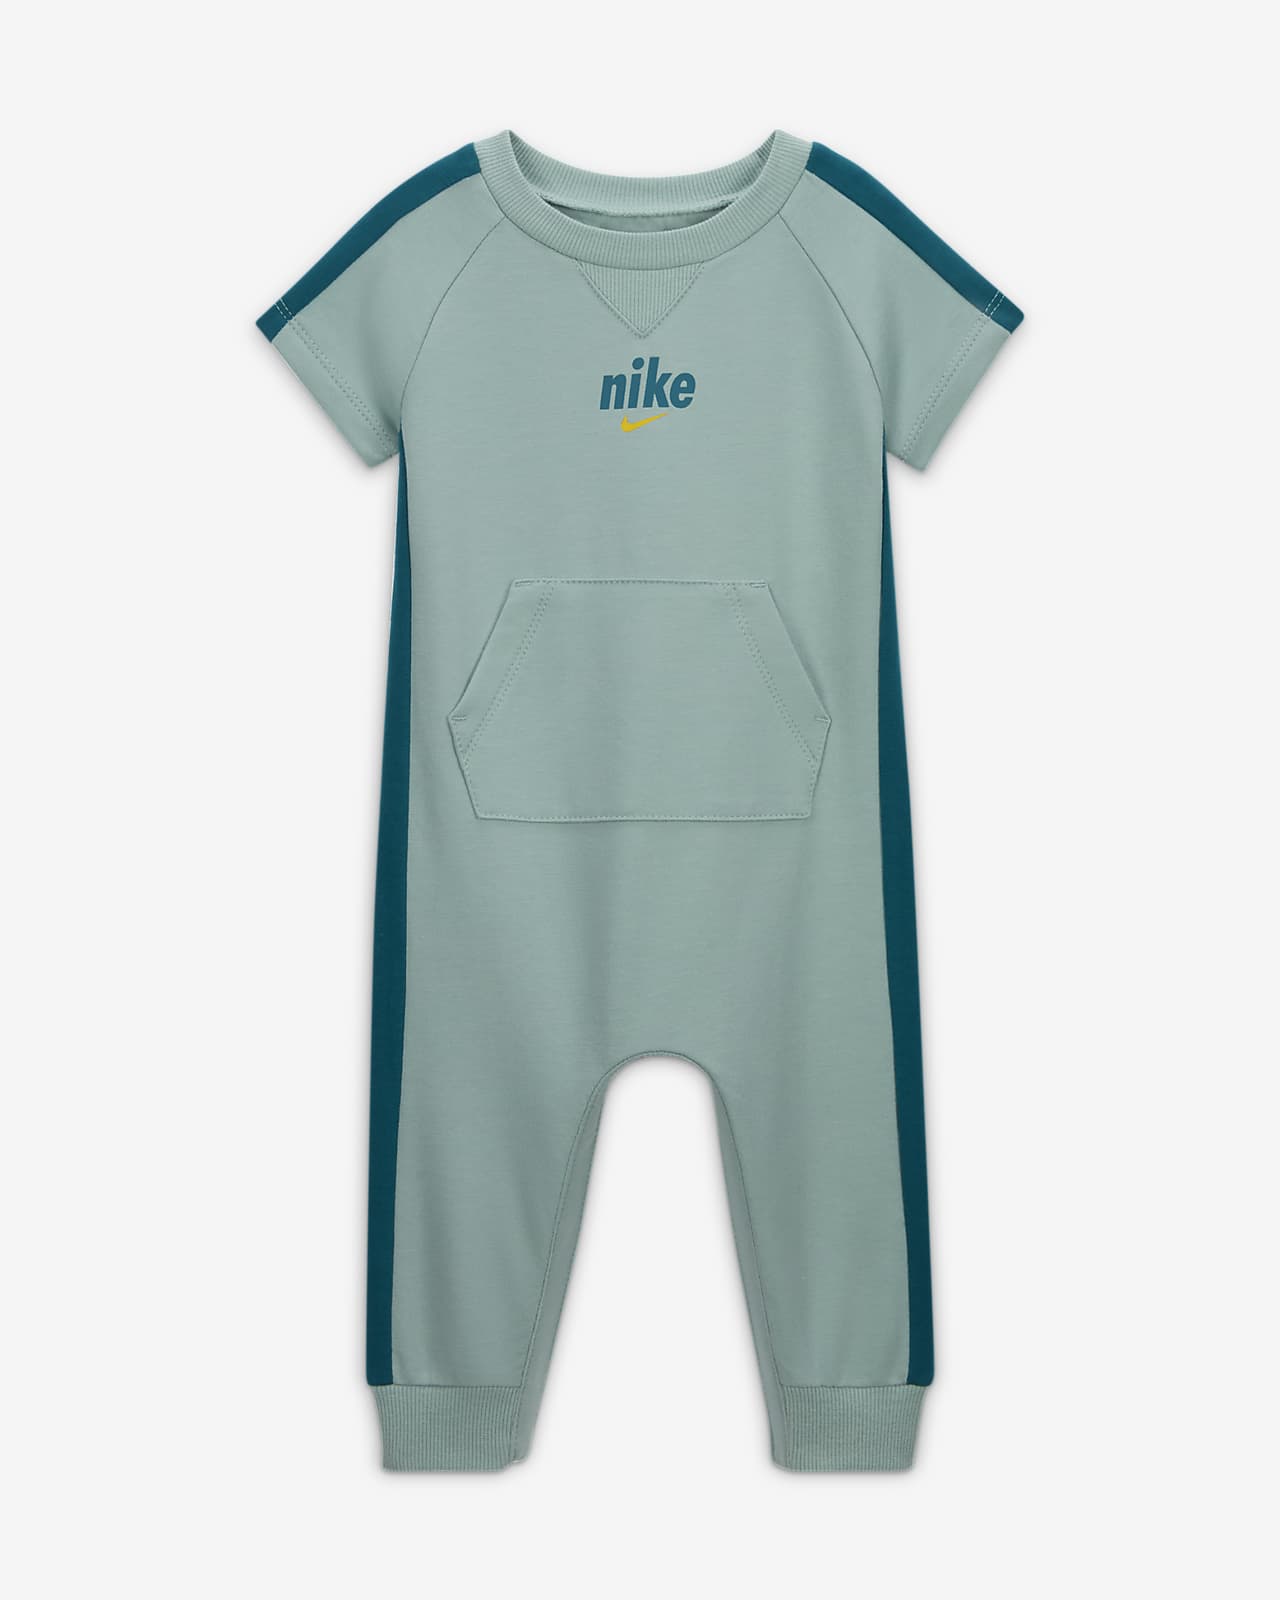 Nike E1D1 Footless Coverall Baby Coverall.